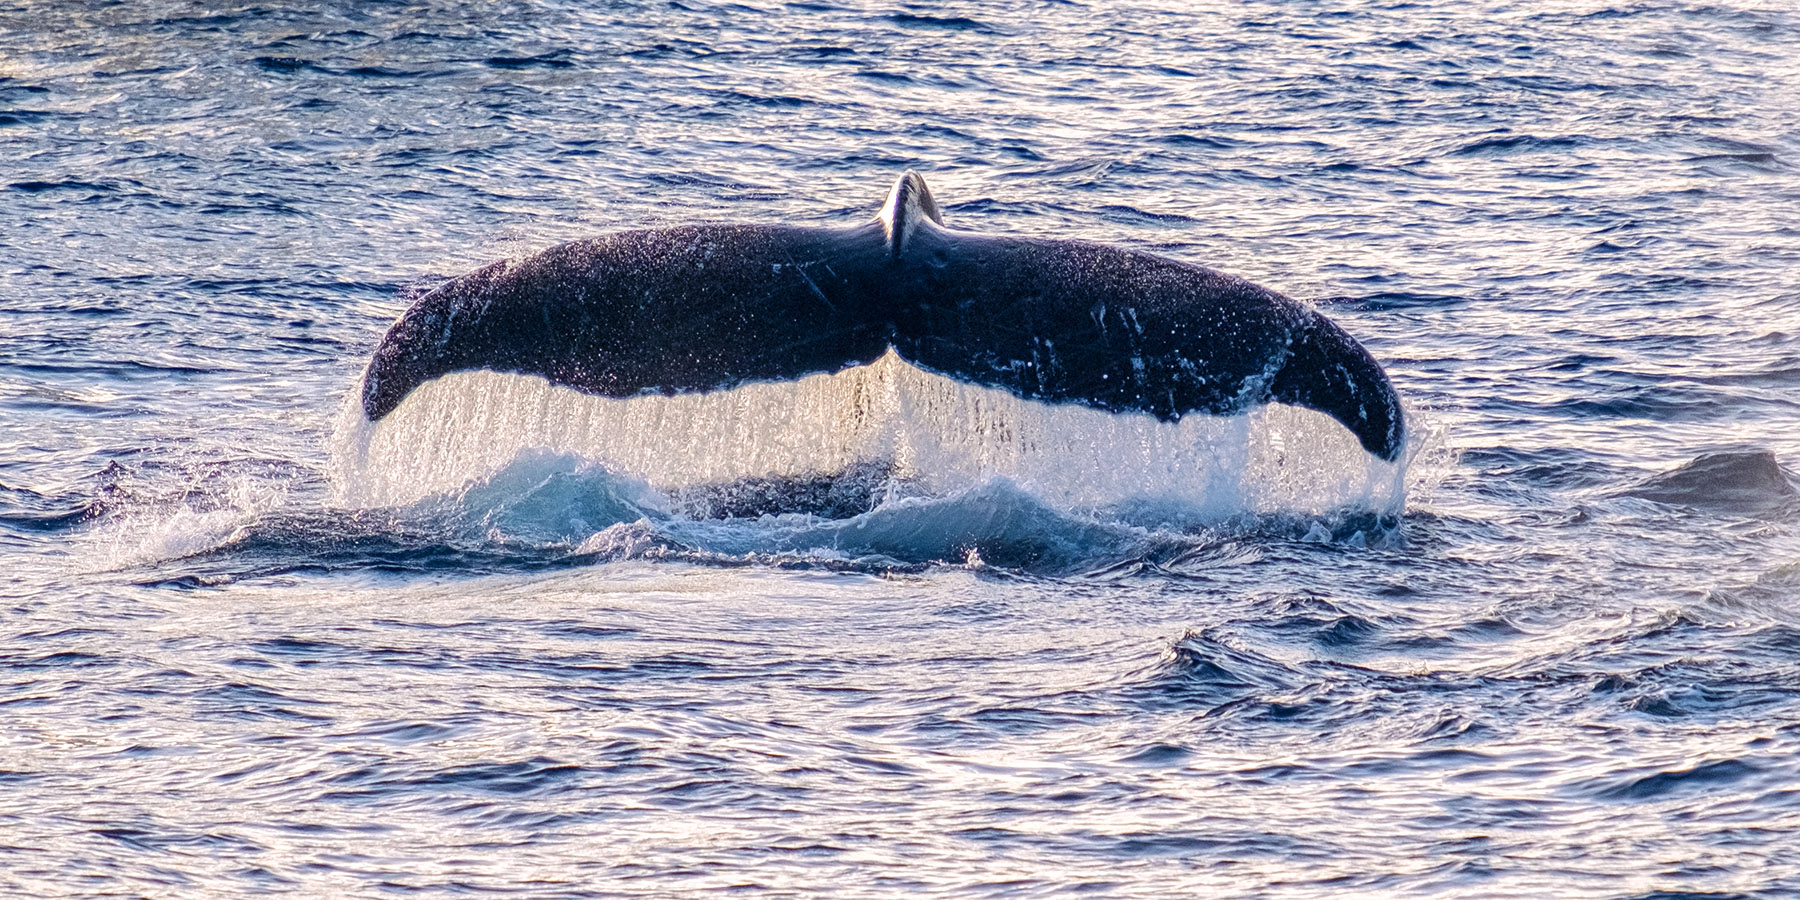 The fluke (tail) of a humpback whale can be as much as 5.5 meters (18 feet) wide